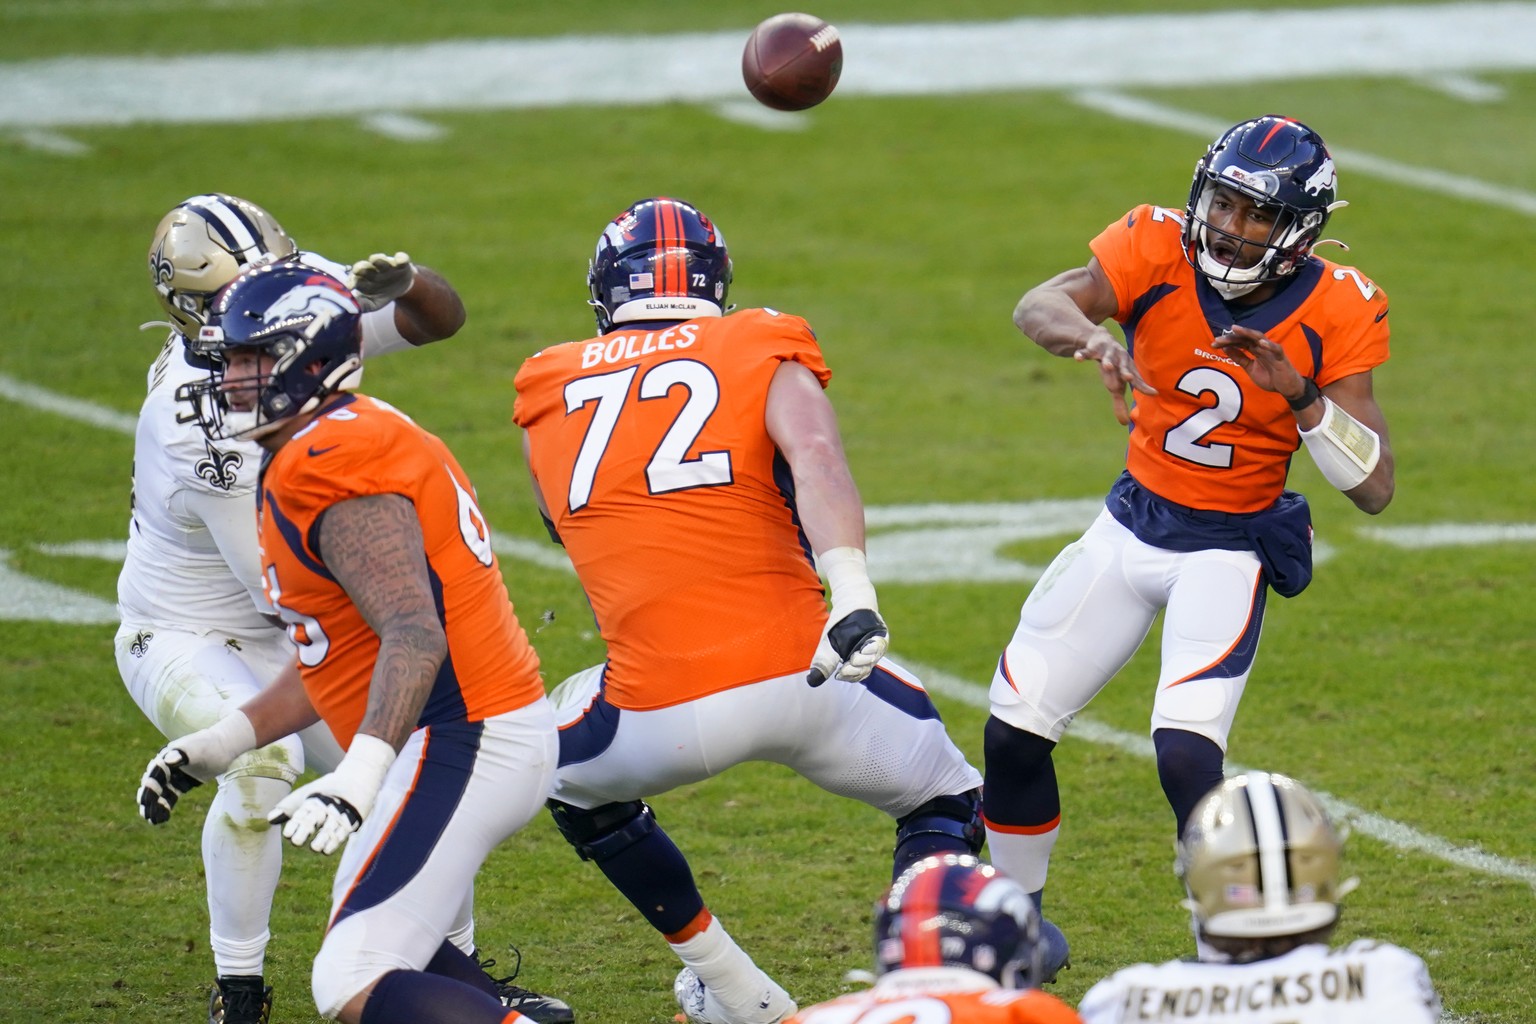 Denver Broncos quarterback Kendall Hinton (2) throws against the New Orleans Saints during the second half of an NFL football game, Sunday, Nov. 29, 2020, in Denver. (AP Photo/David Zalubowski)